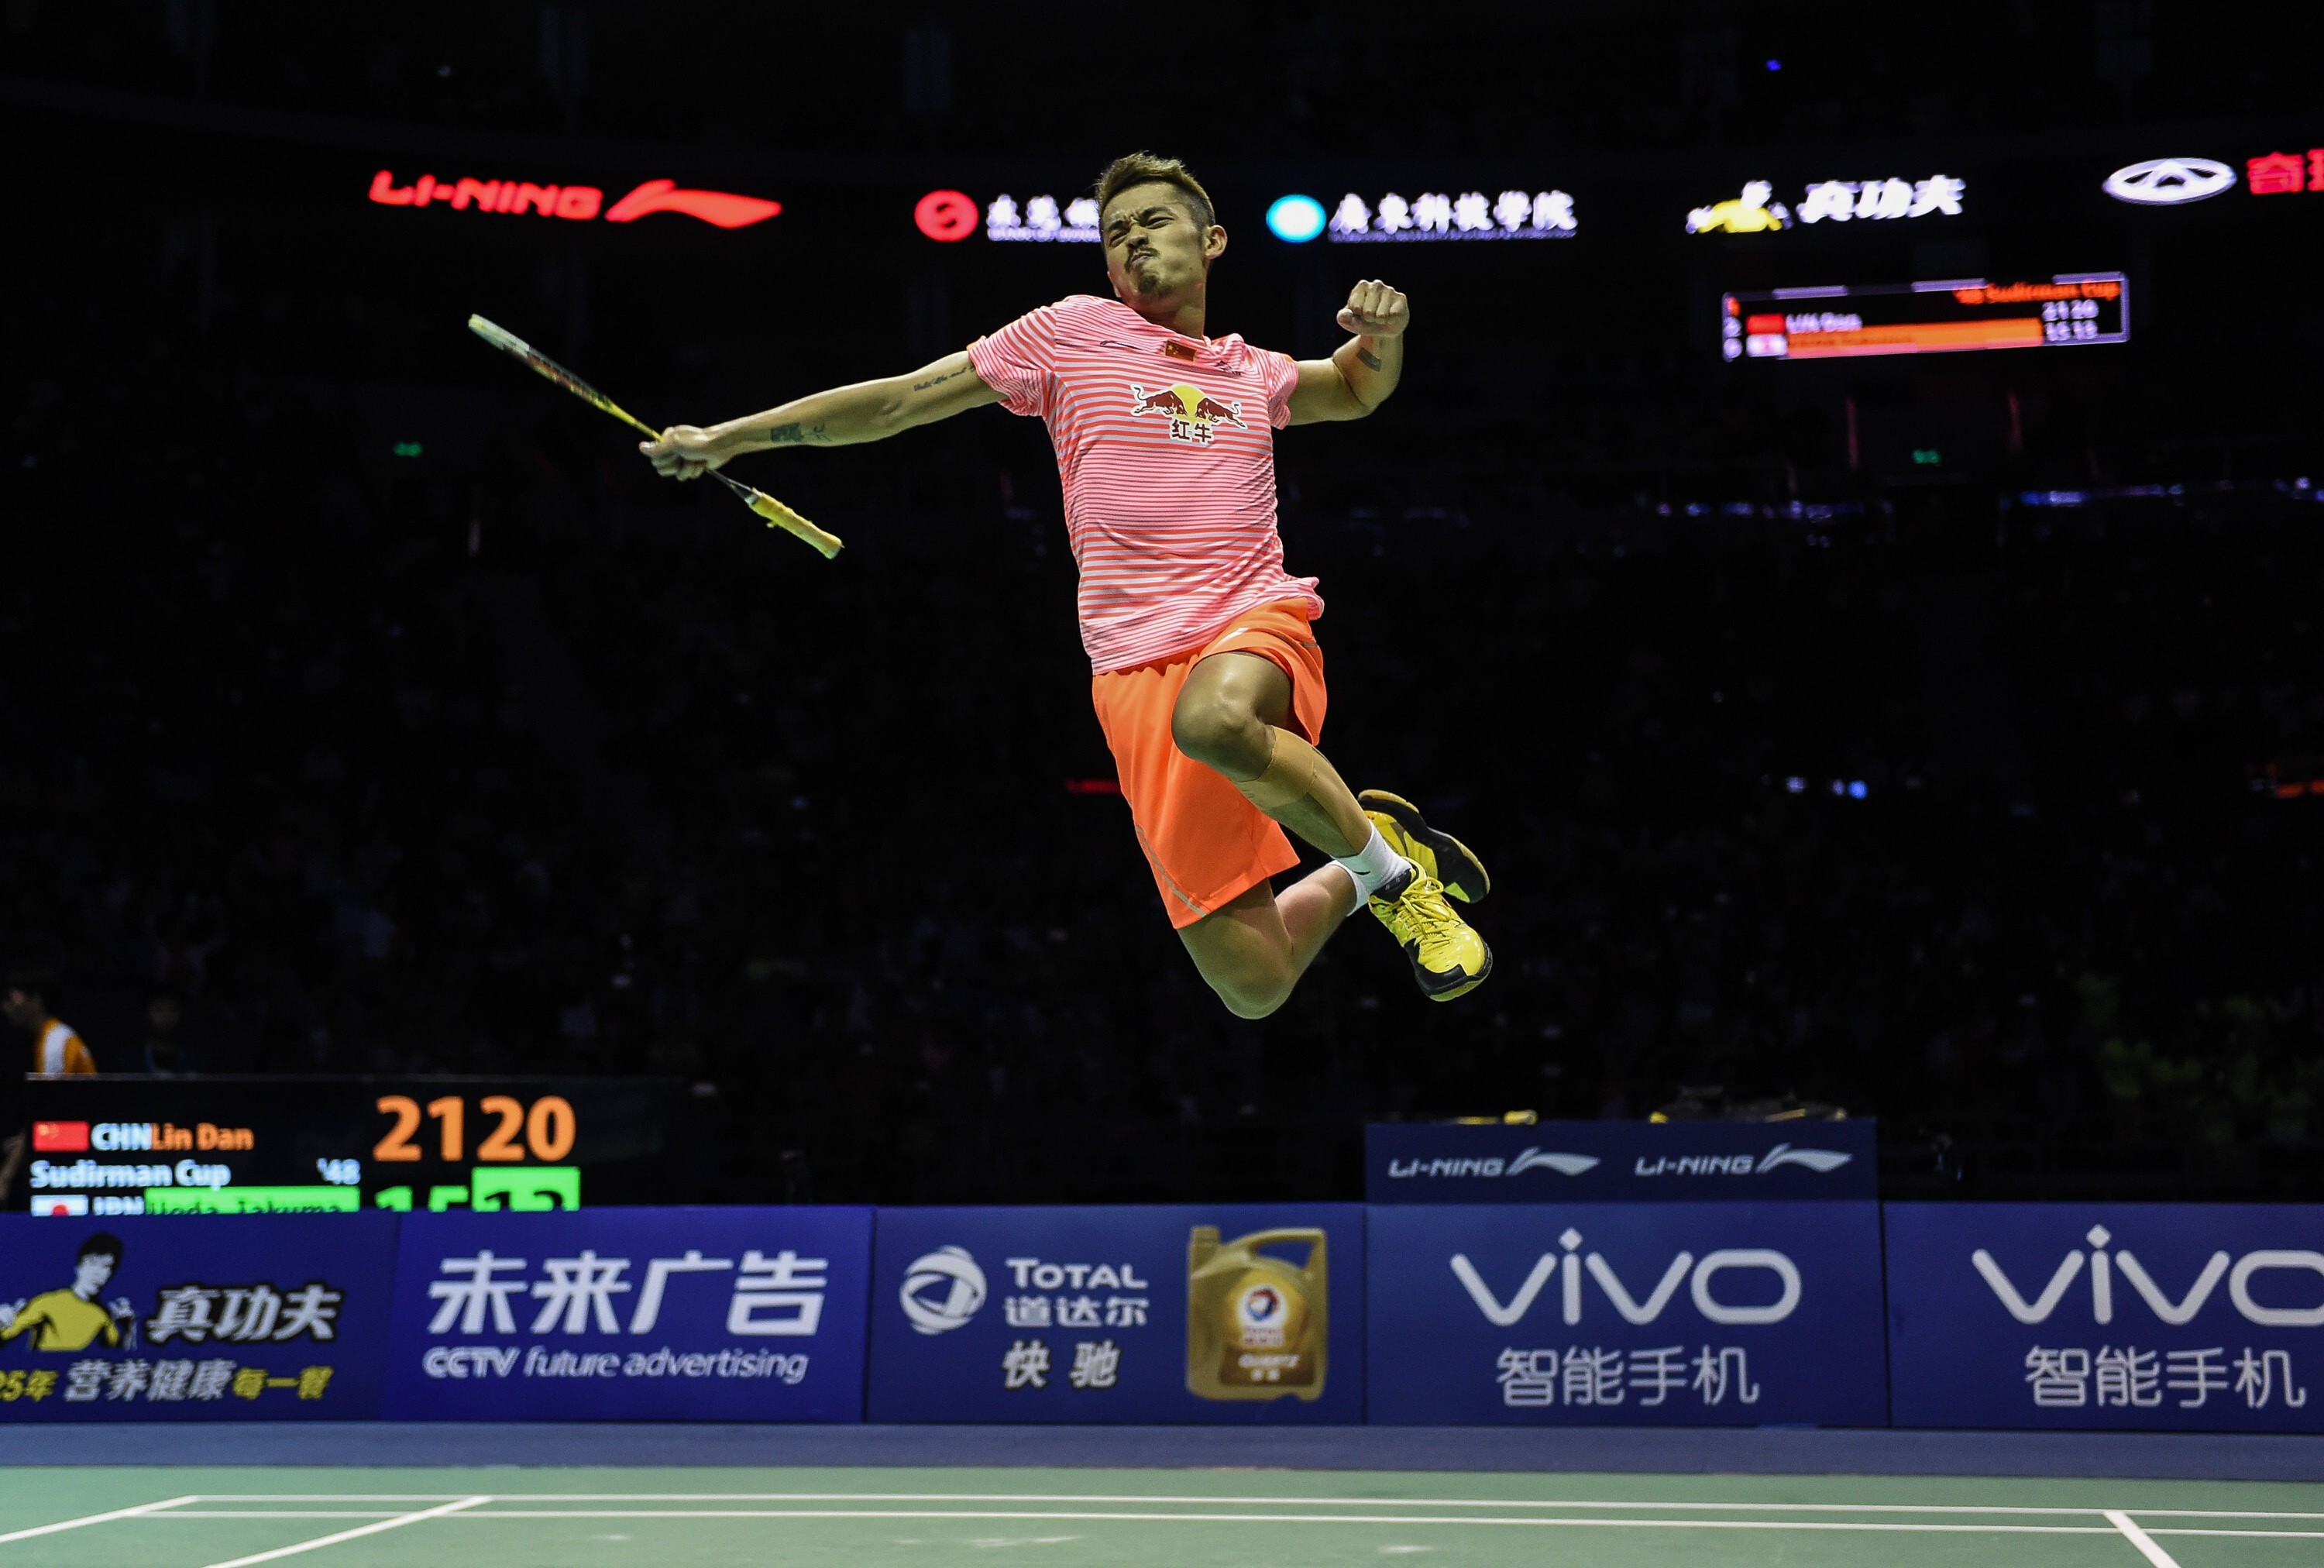 Lin Dan will go down in history as one of the greatest badminton players of all time, and is an Olympic legend in China. Photo: Xinhua